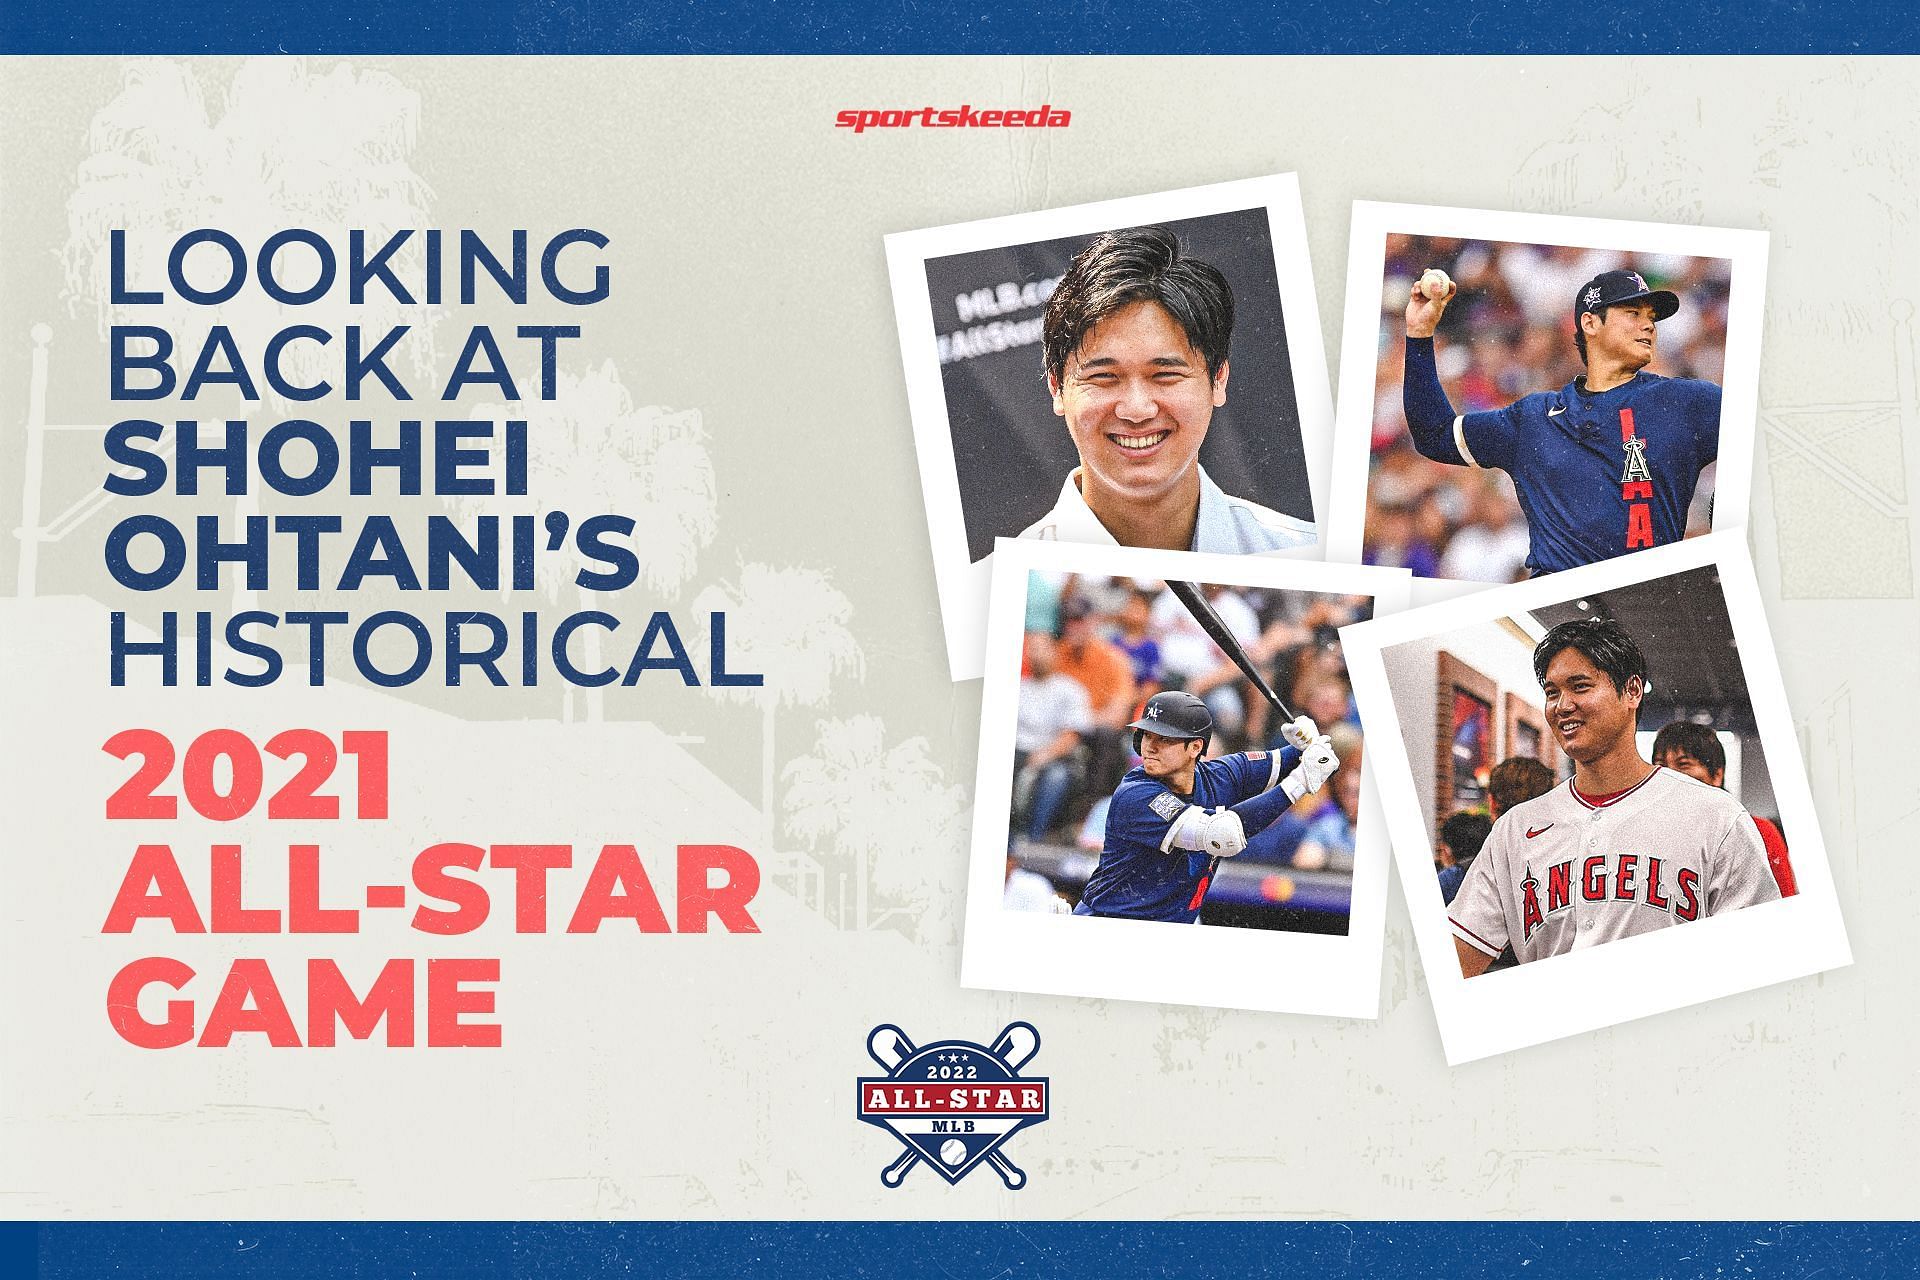 Shohei Ohtani had an unforgetful All-Star performance in 2021. Ohtani became the first player in history to be selected as a pitcher and position player.